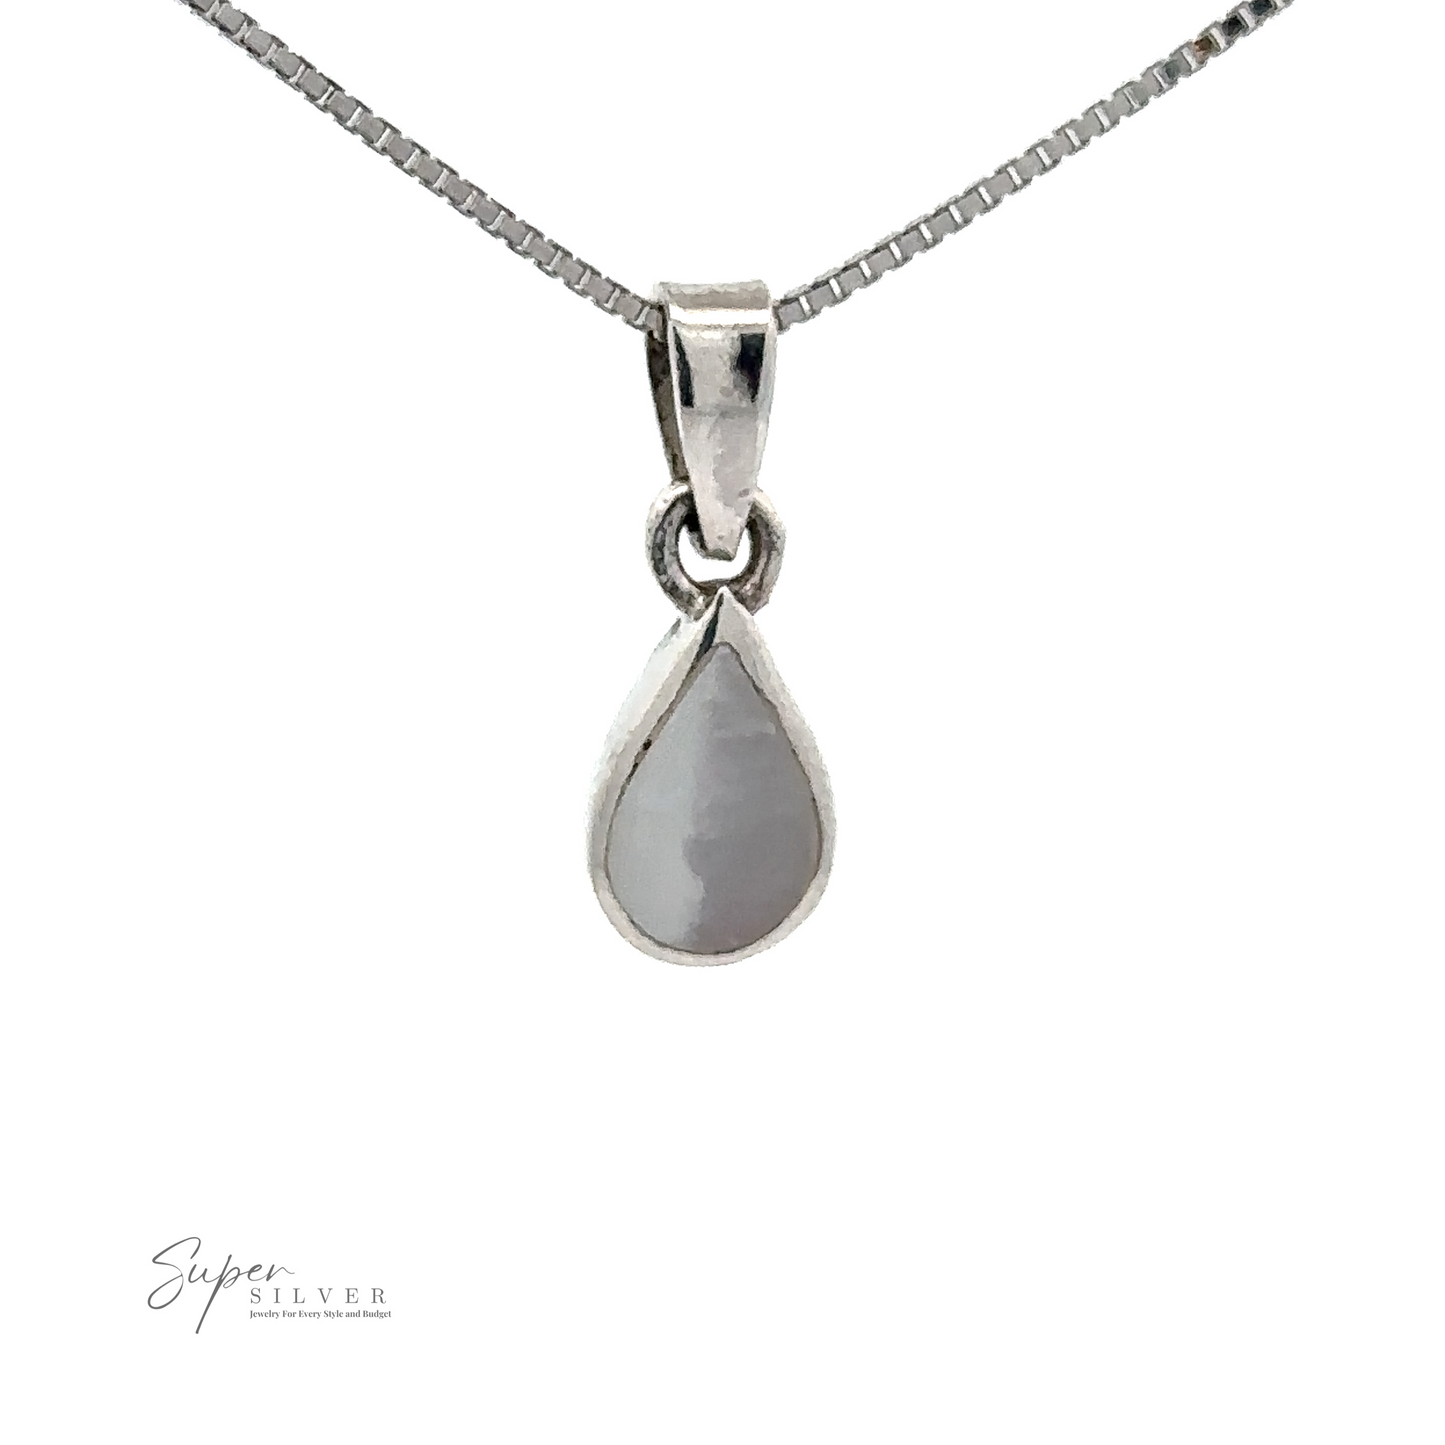 
                  
                    A sterling silver necklace featuring a Tiny Inlay Teardrop Pendant with a light-colored stone and a small "Super Silver" logo in the bottom left corner, perfect for those who appreciate minimal jewelry.
                  
                